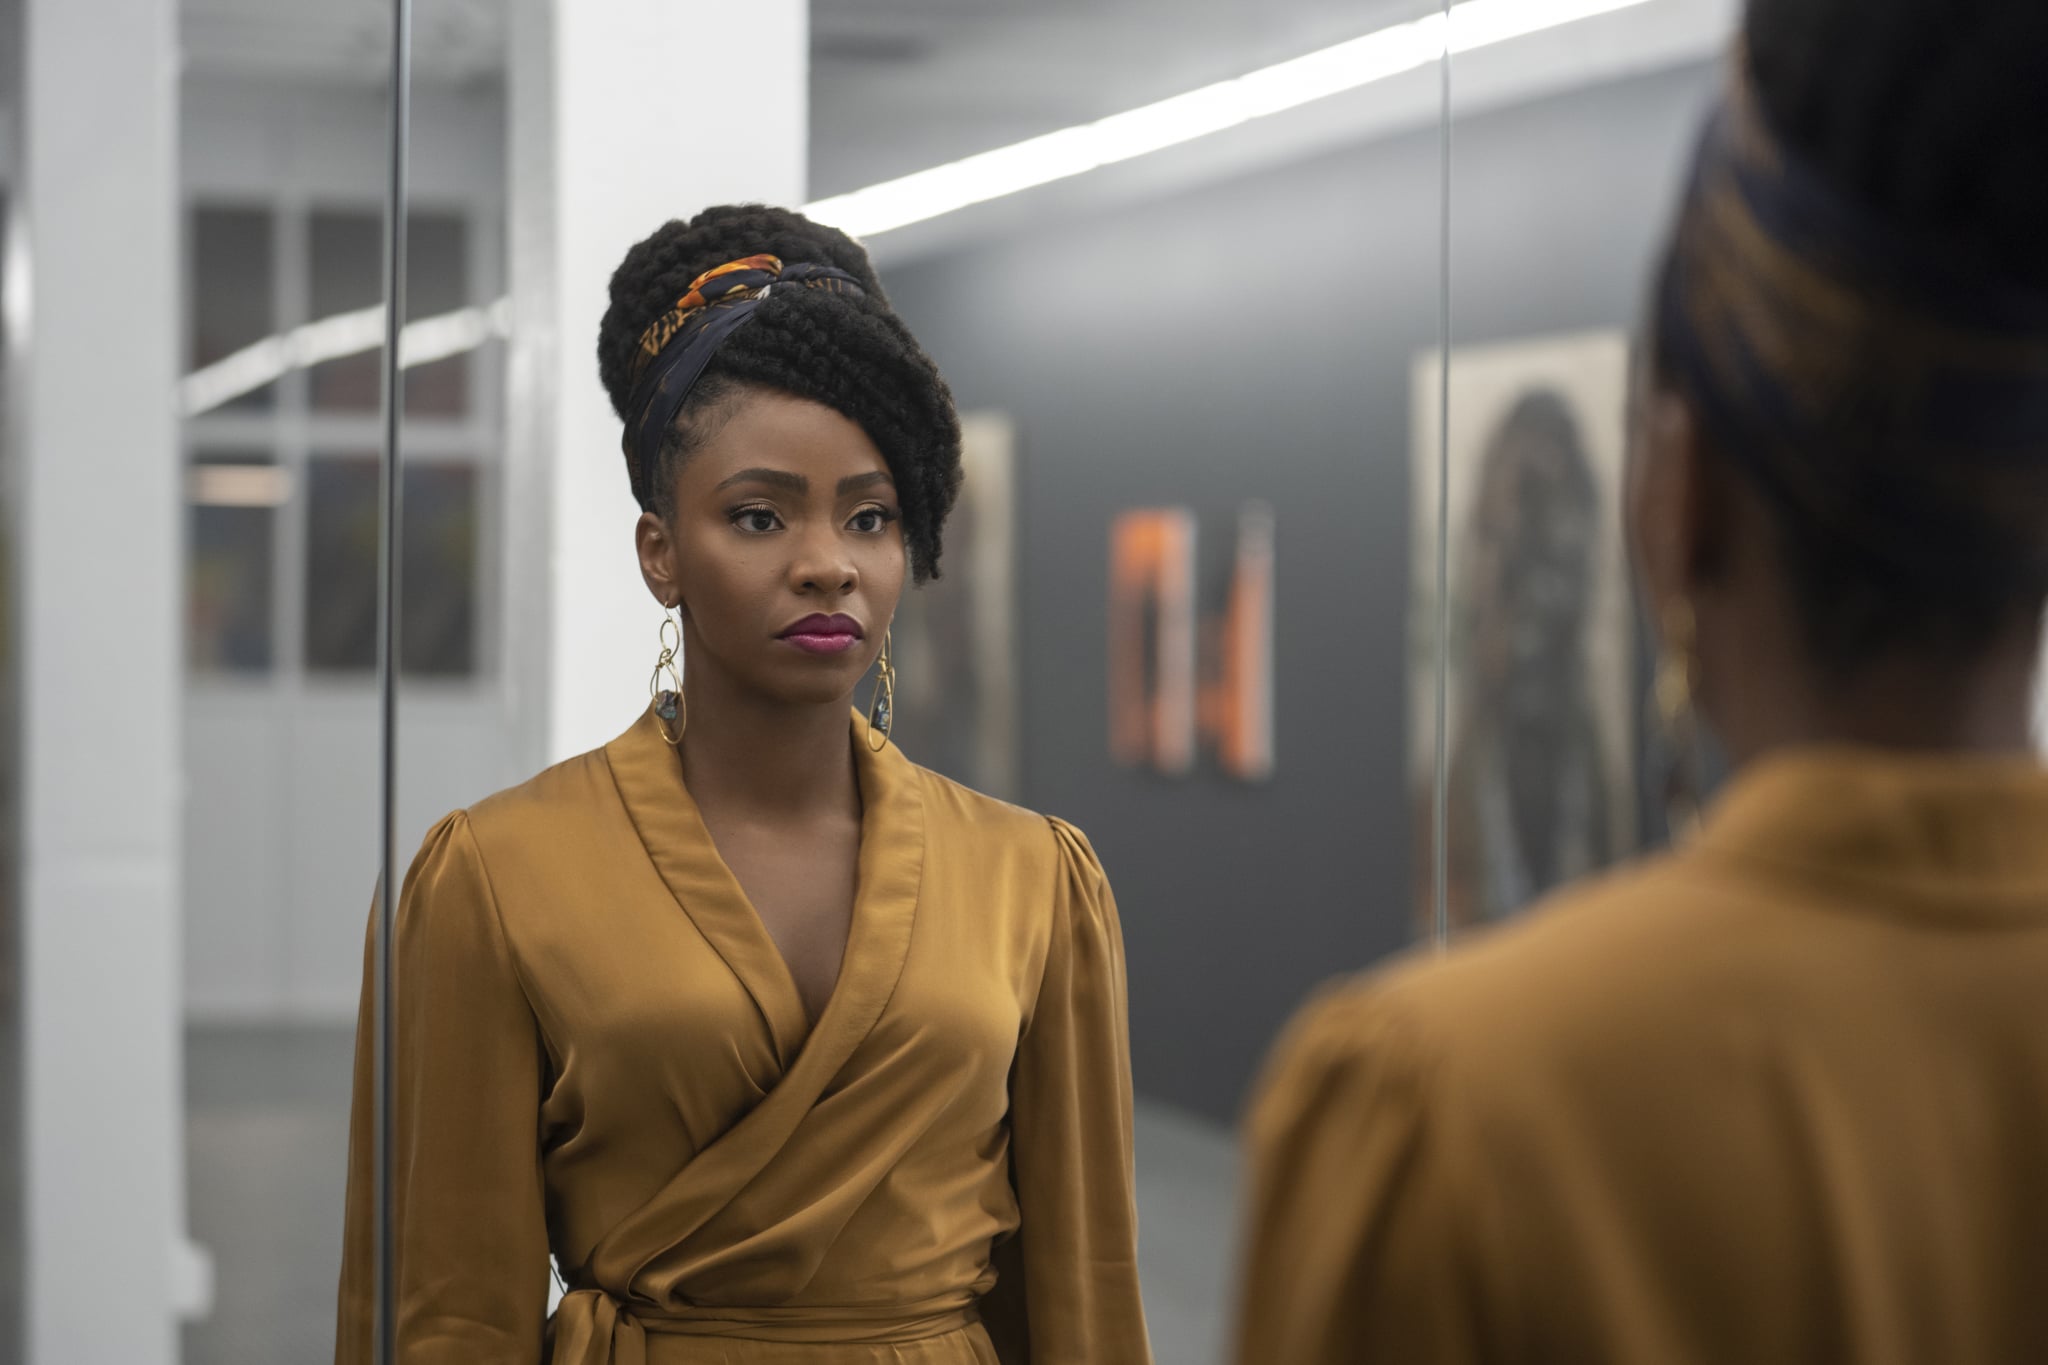 Teyonah Parris as Brianna Cartwright in Candyman, directed by Nia DaCosta.